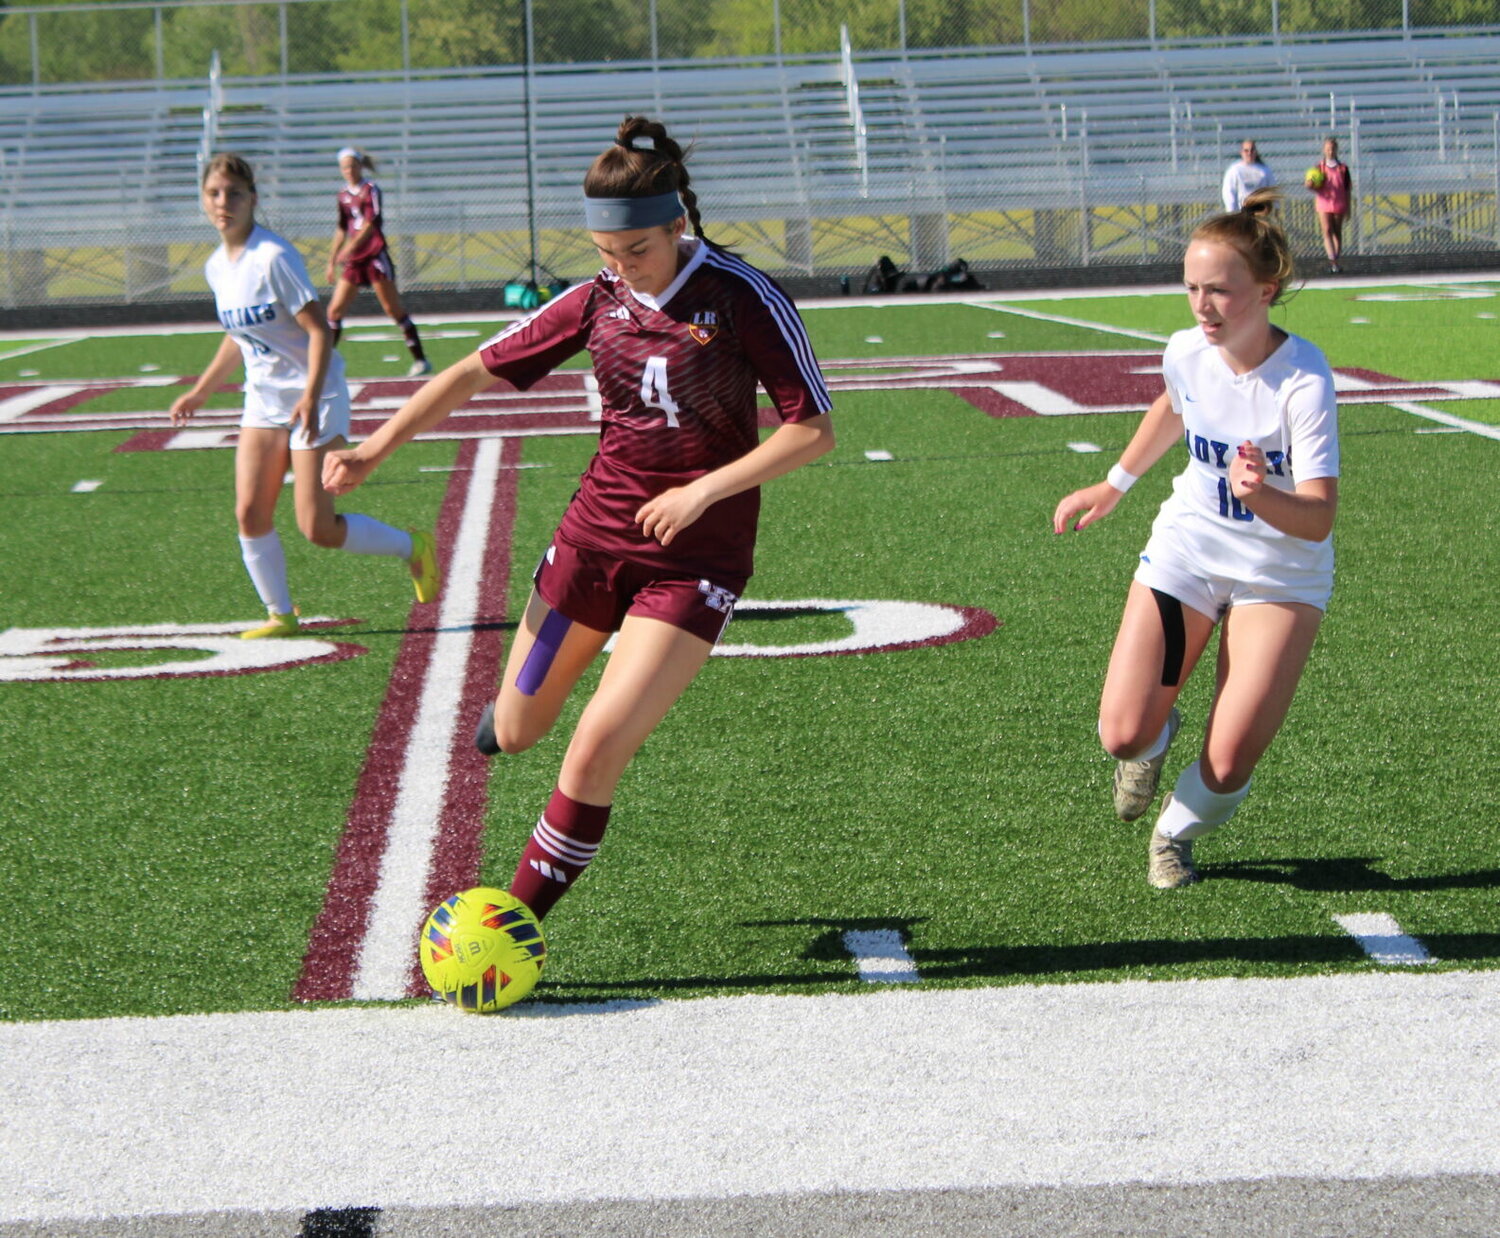 L-R junior Alex Wubbena makes a kick while Marshfield Junior Sydney Strain rushes in, hoping to block during May 2 match pitting the two teams. Wildcats won with a final score of 3-0.